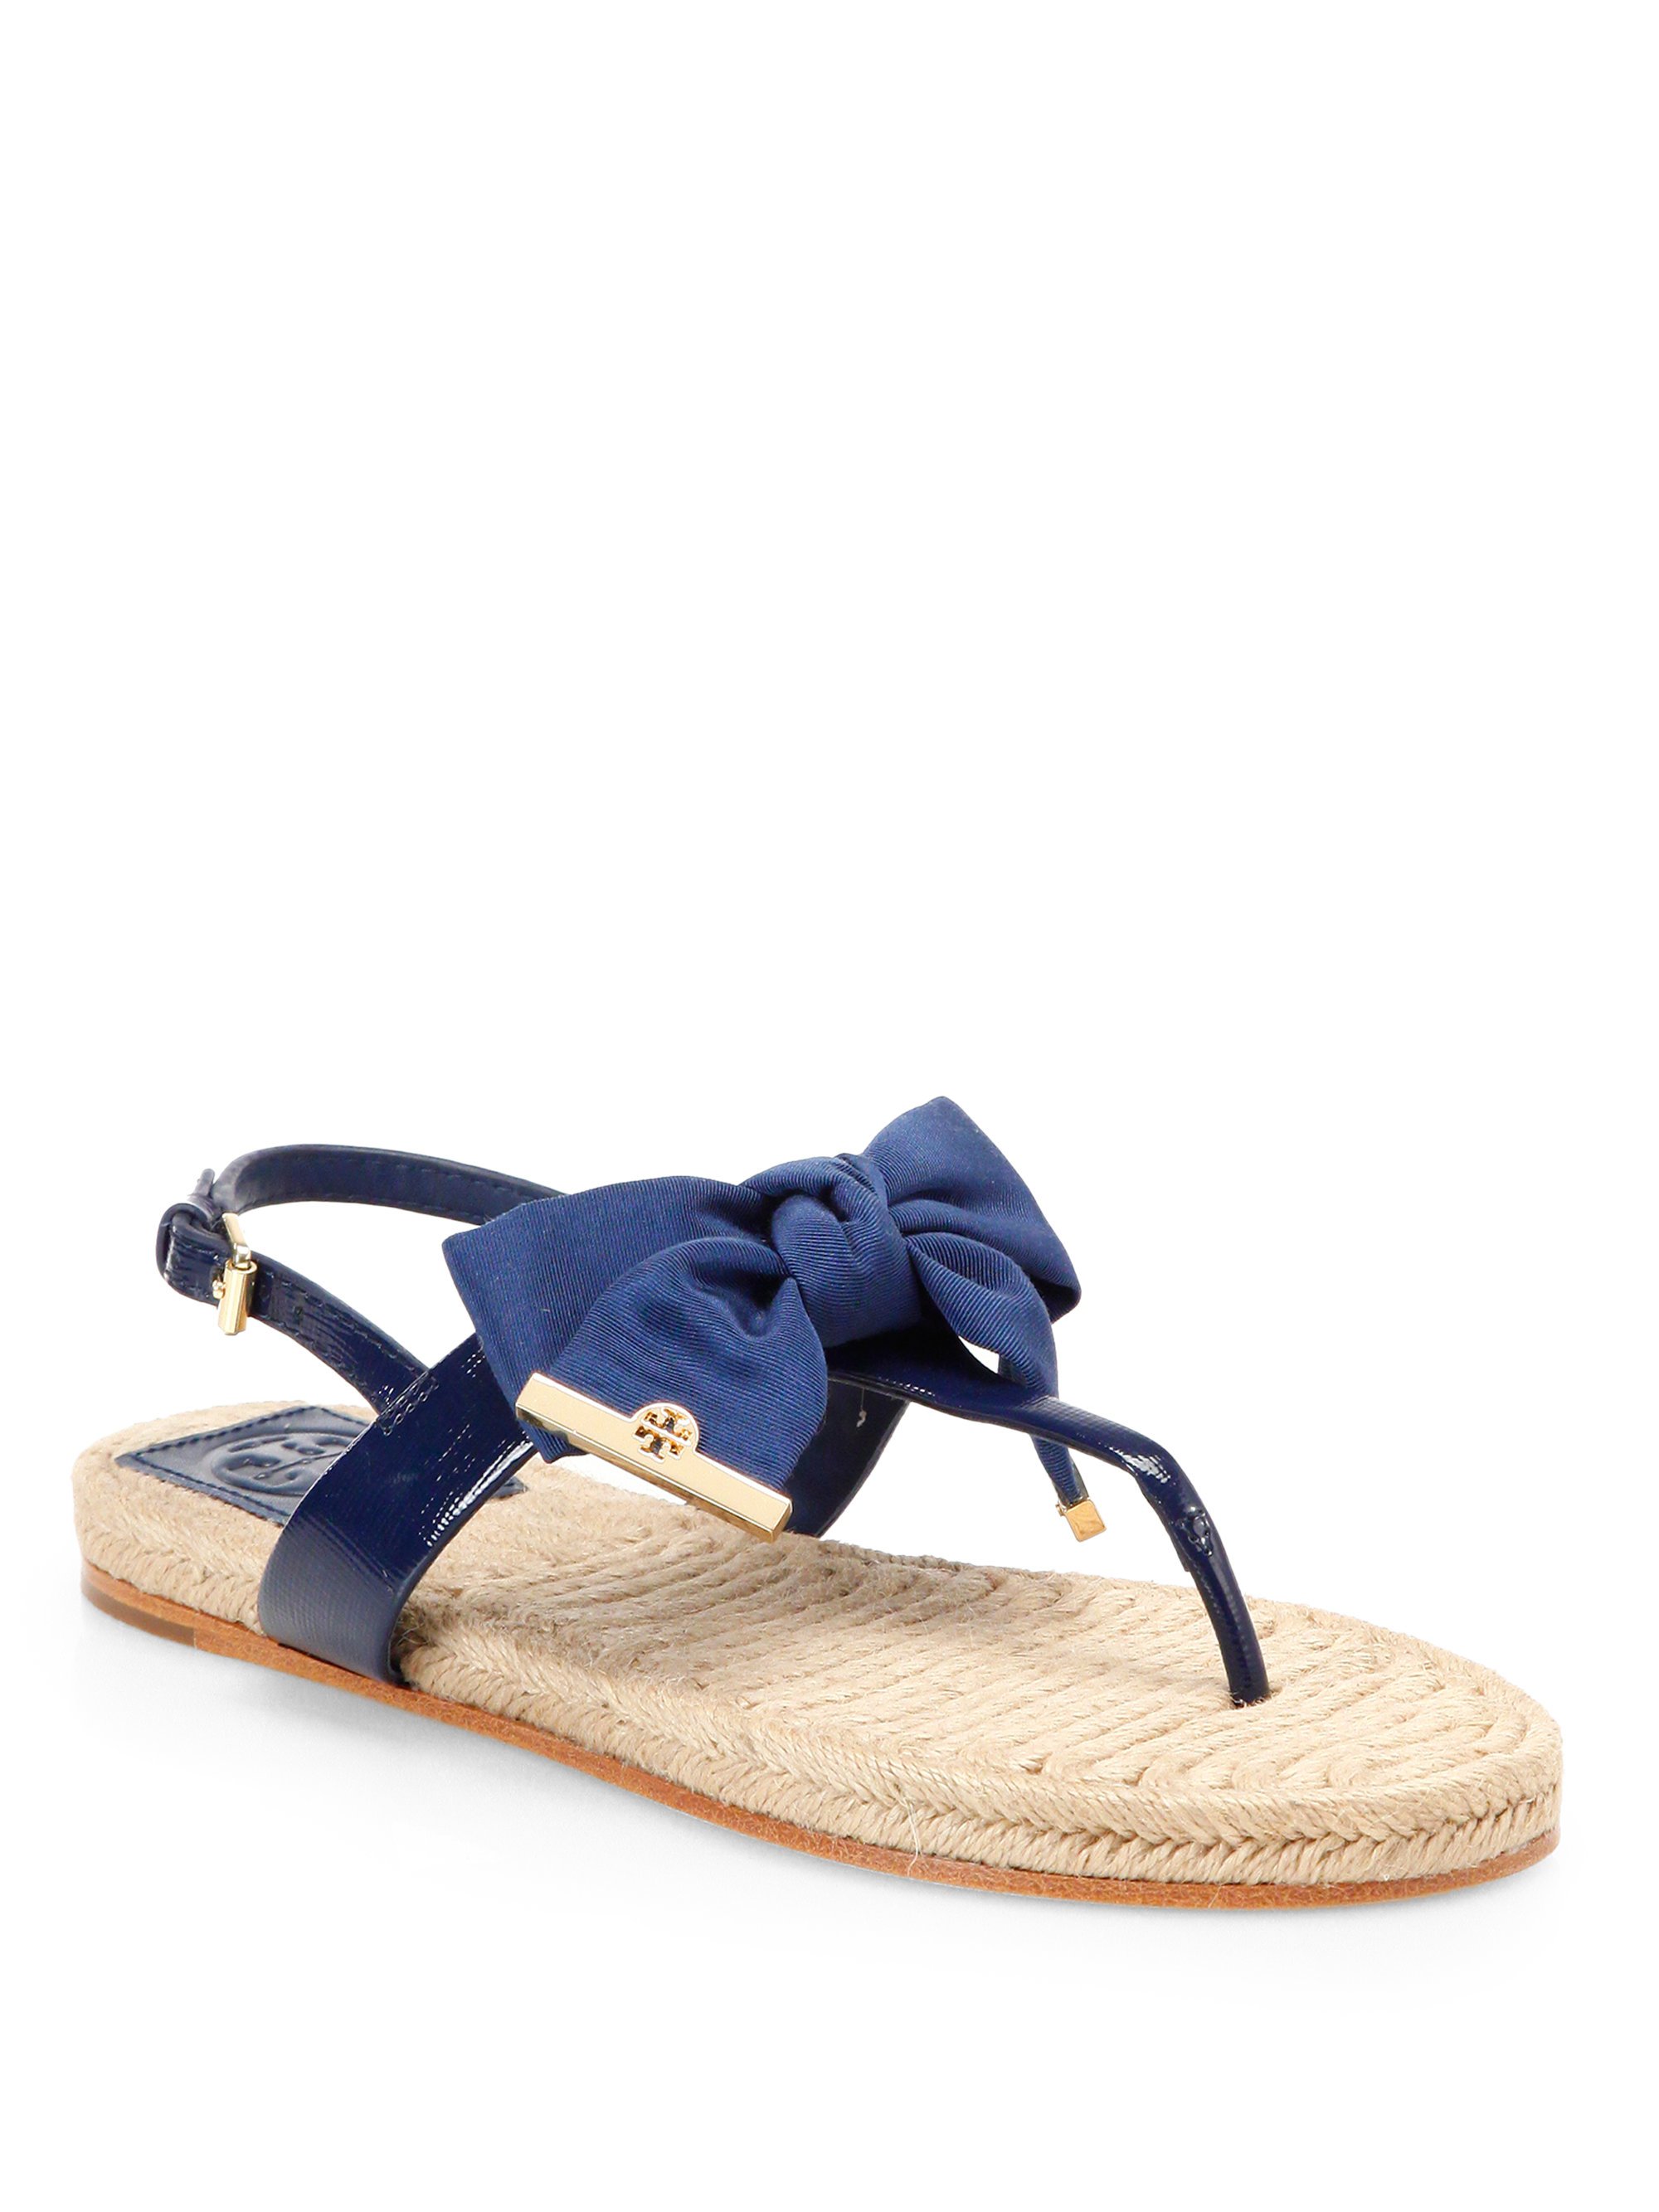 Lyst - Tory Burch Penny Gorsgrain Patent Leather Espadrille Sandals in Blue